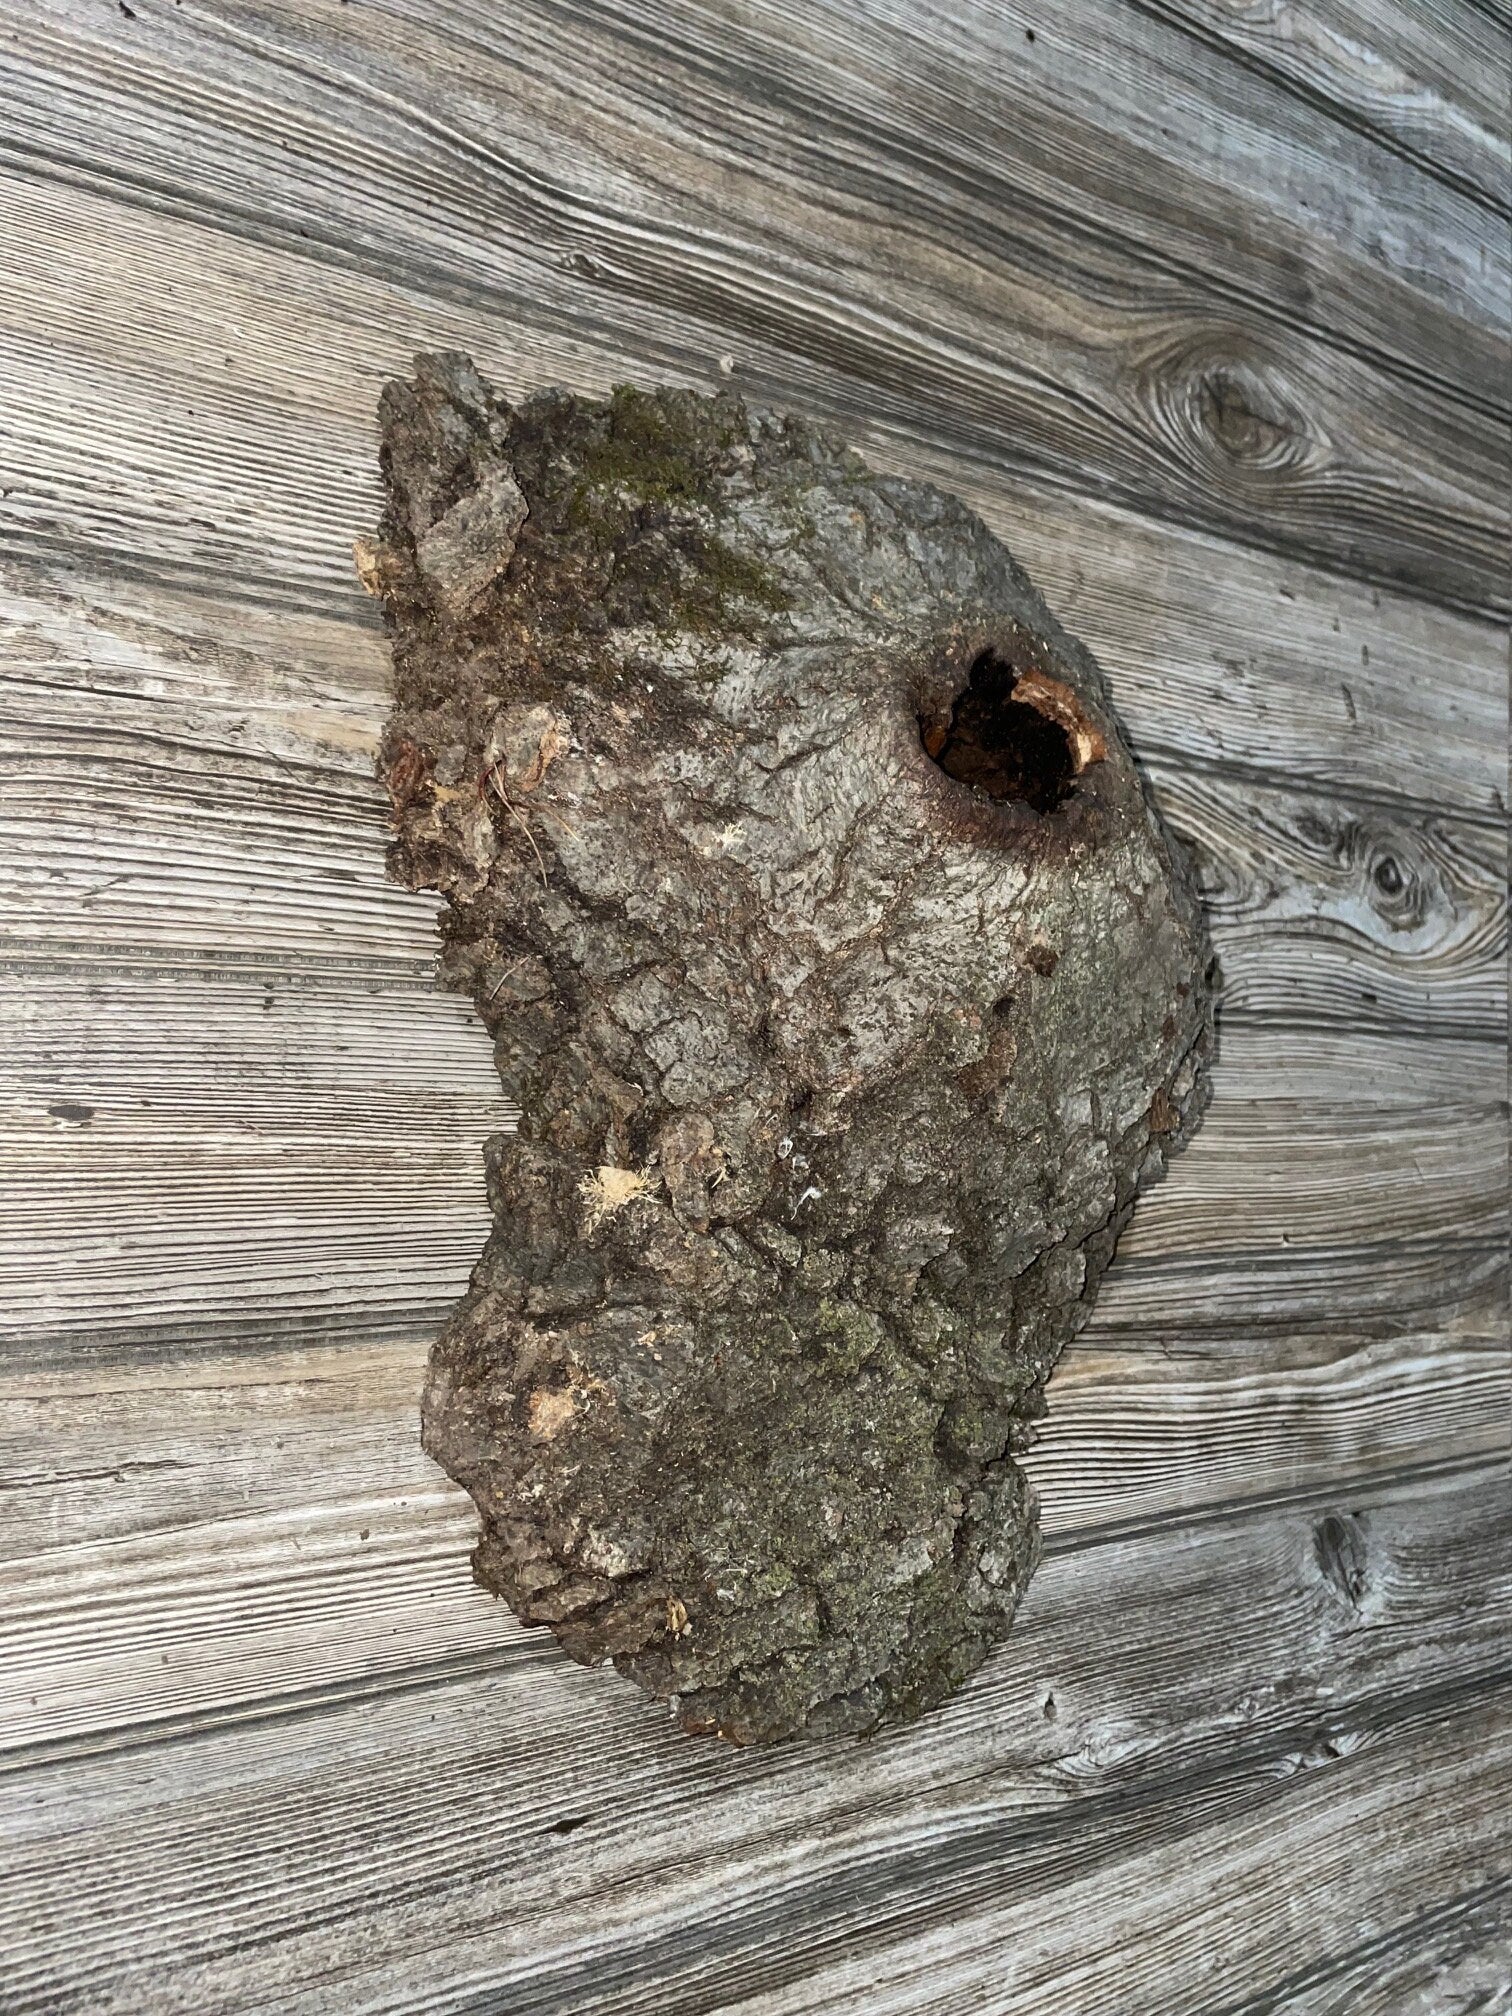 Knot Hole Log, Approximately 17.5 Inches Long by 11.5 Inches Wide and 5 Inches Deep